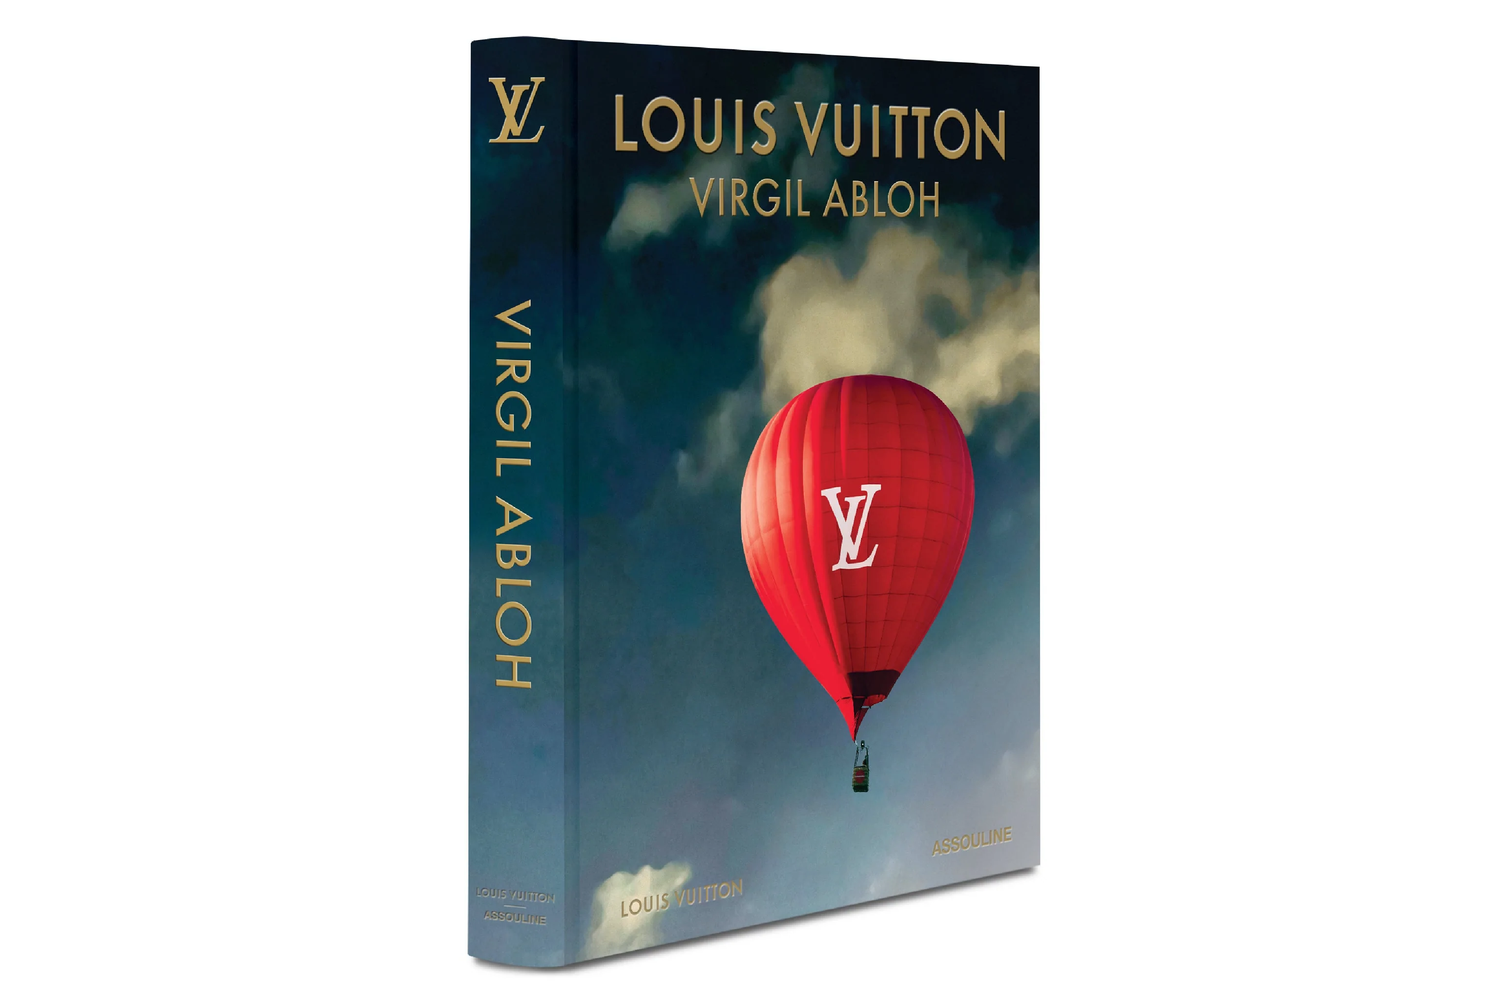 The best bits from Virgil Abloh and Nigo's second Louis Vuitton